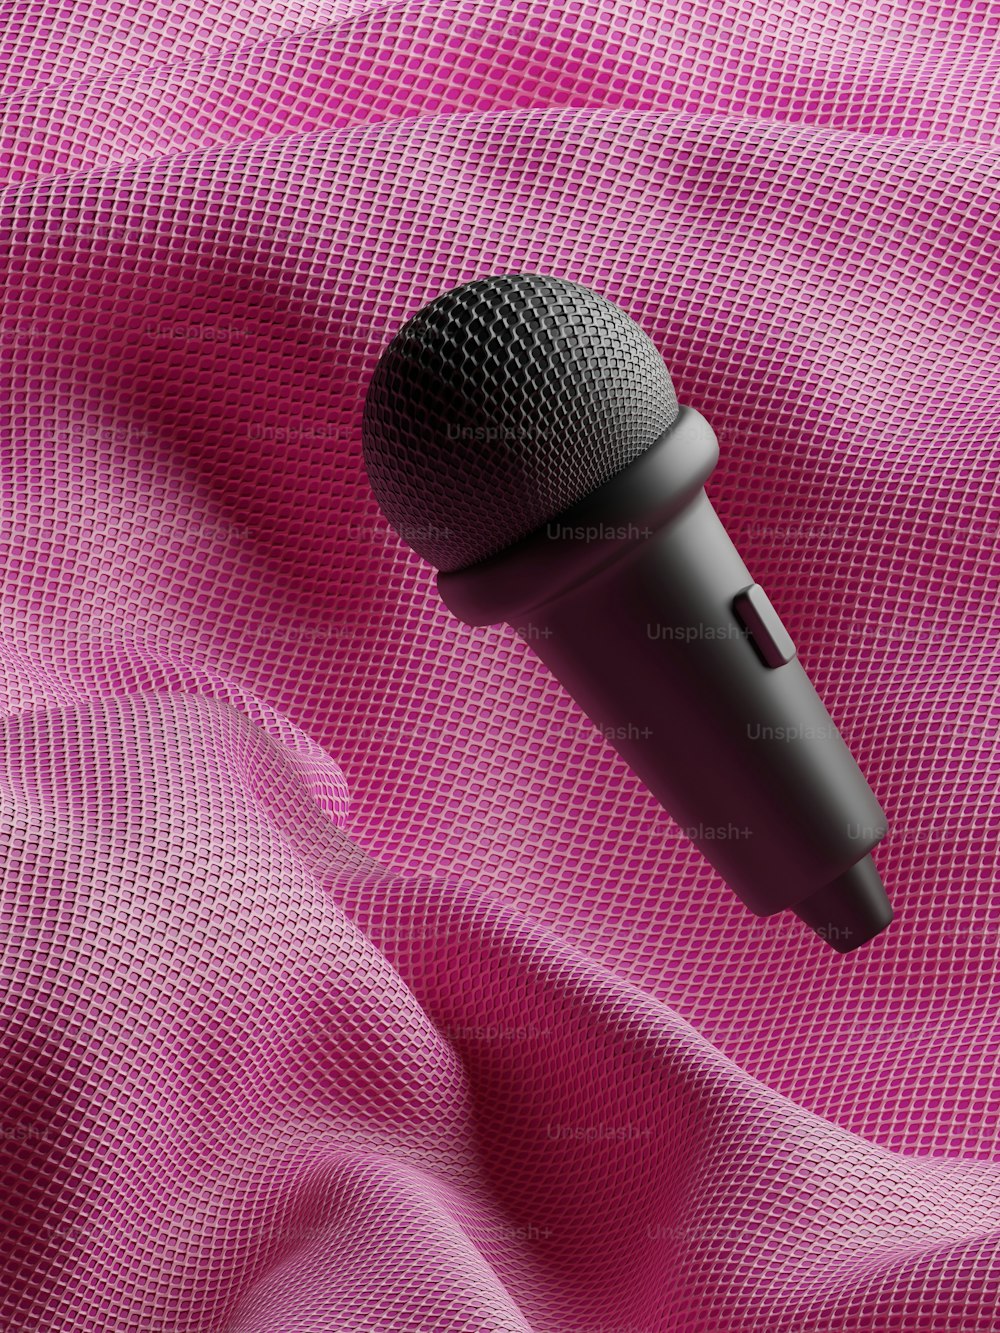 a microphone on a pink fabric